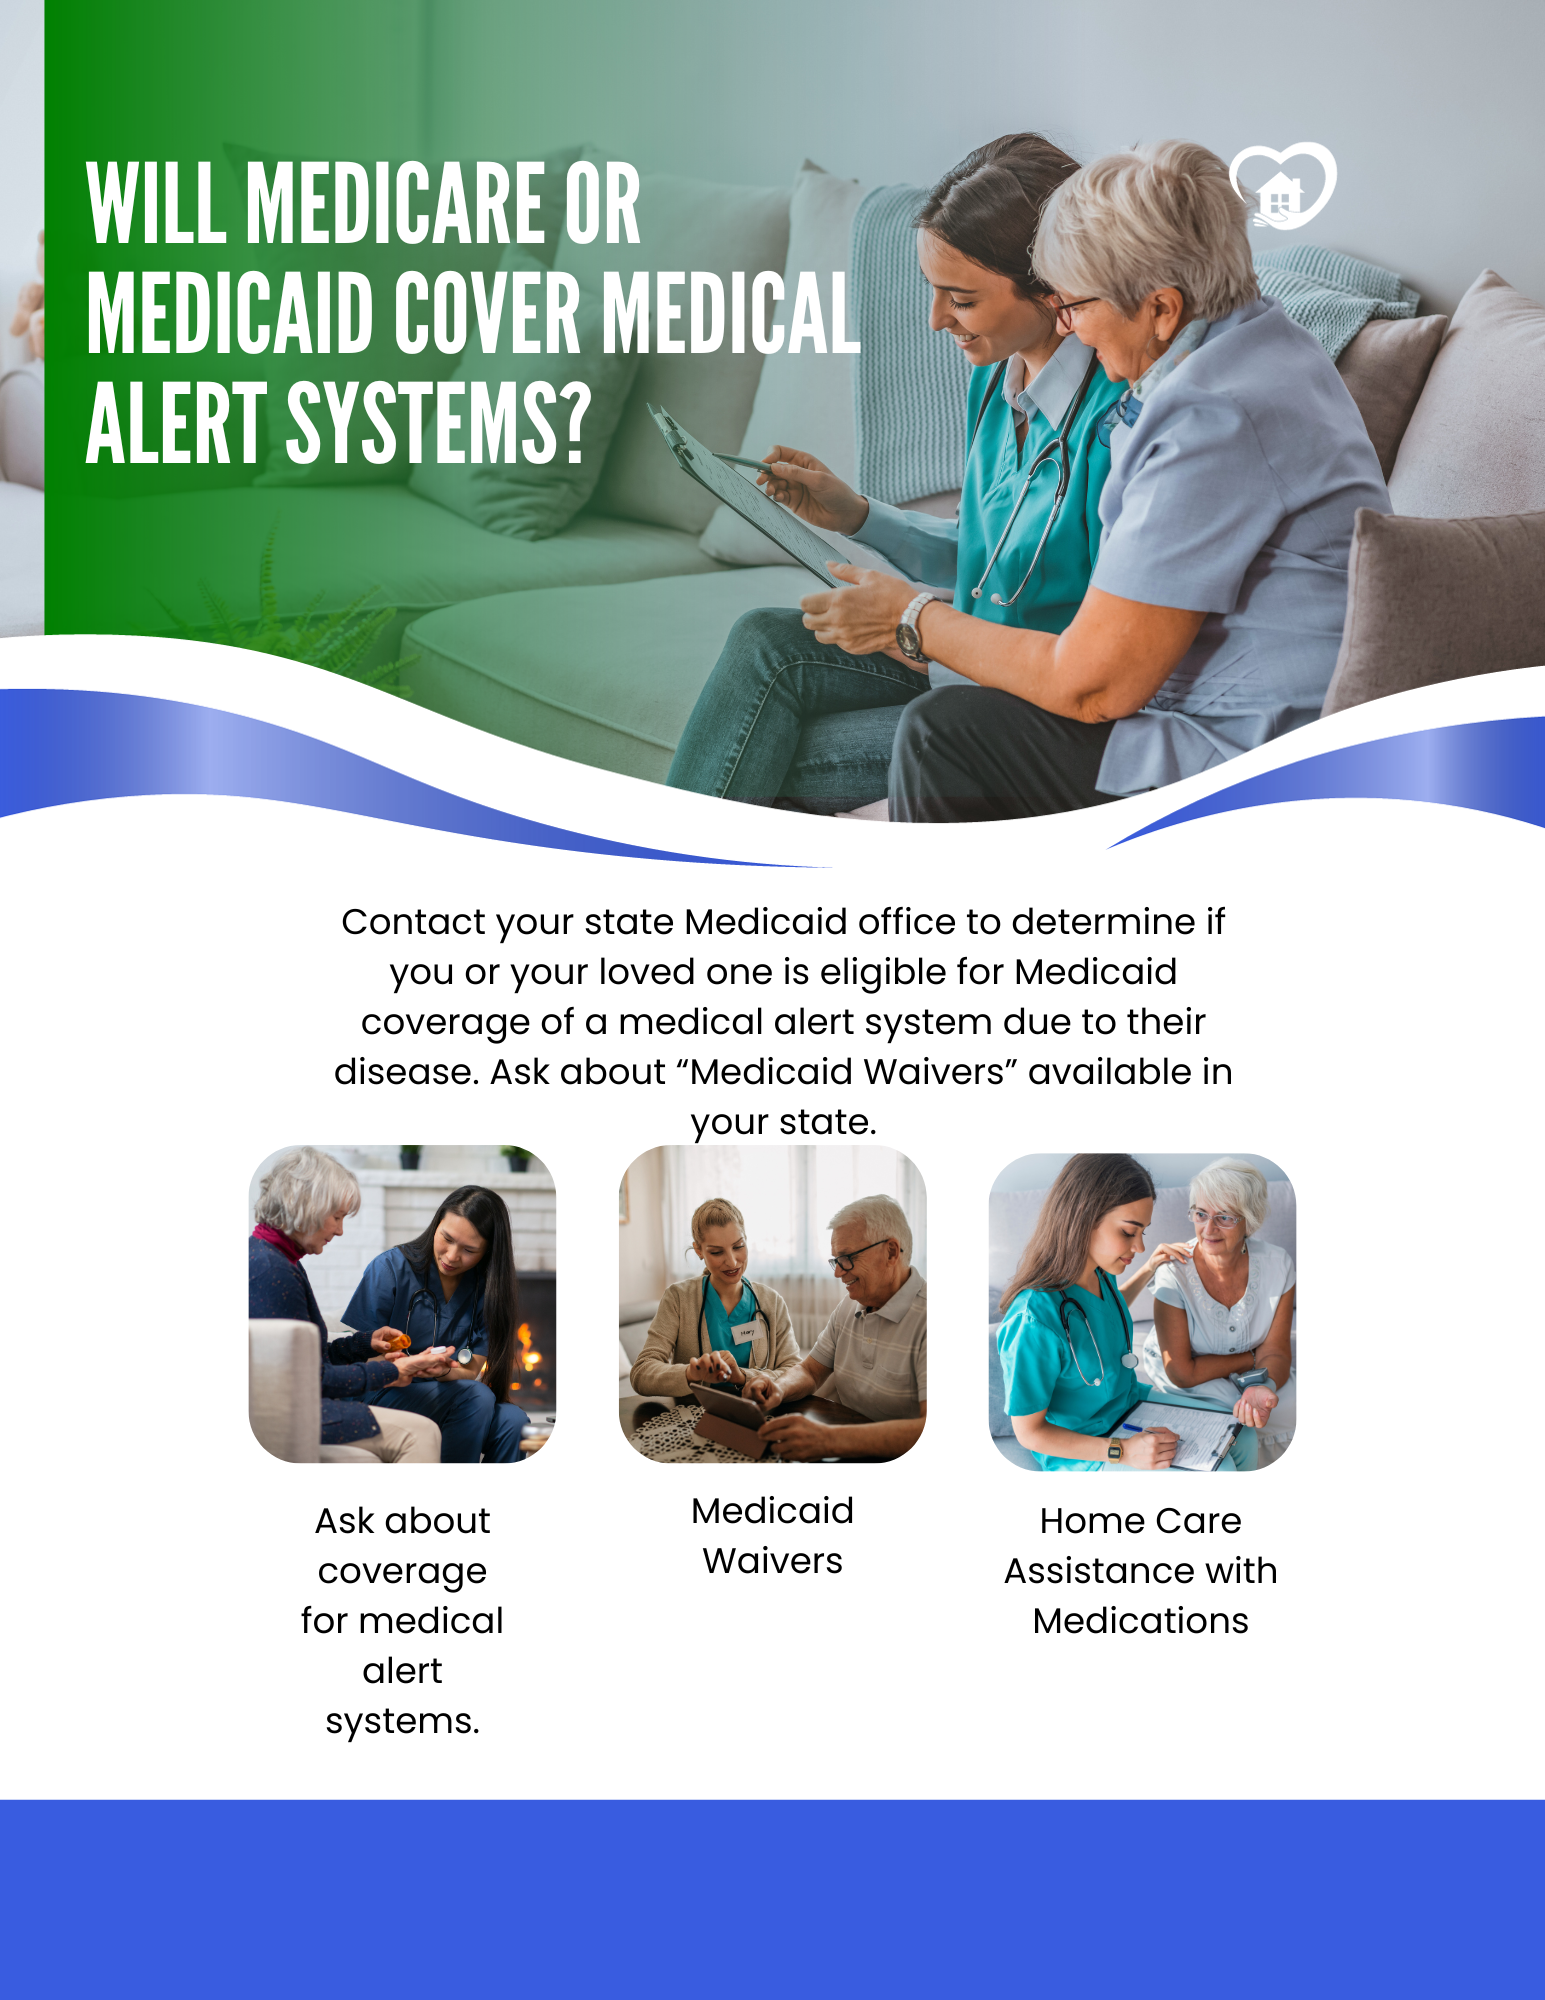 Will Medicare or Medicaid cover medical alert systems?